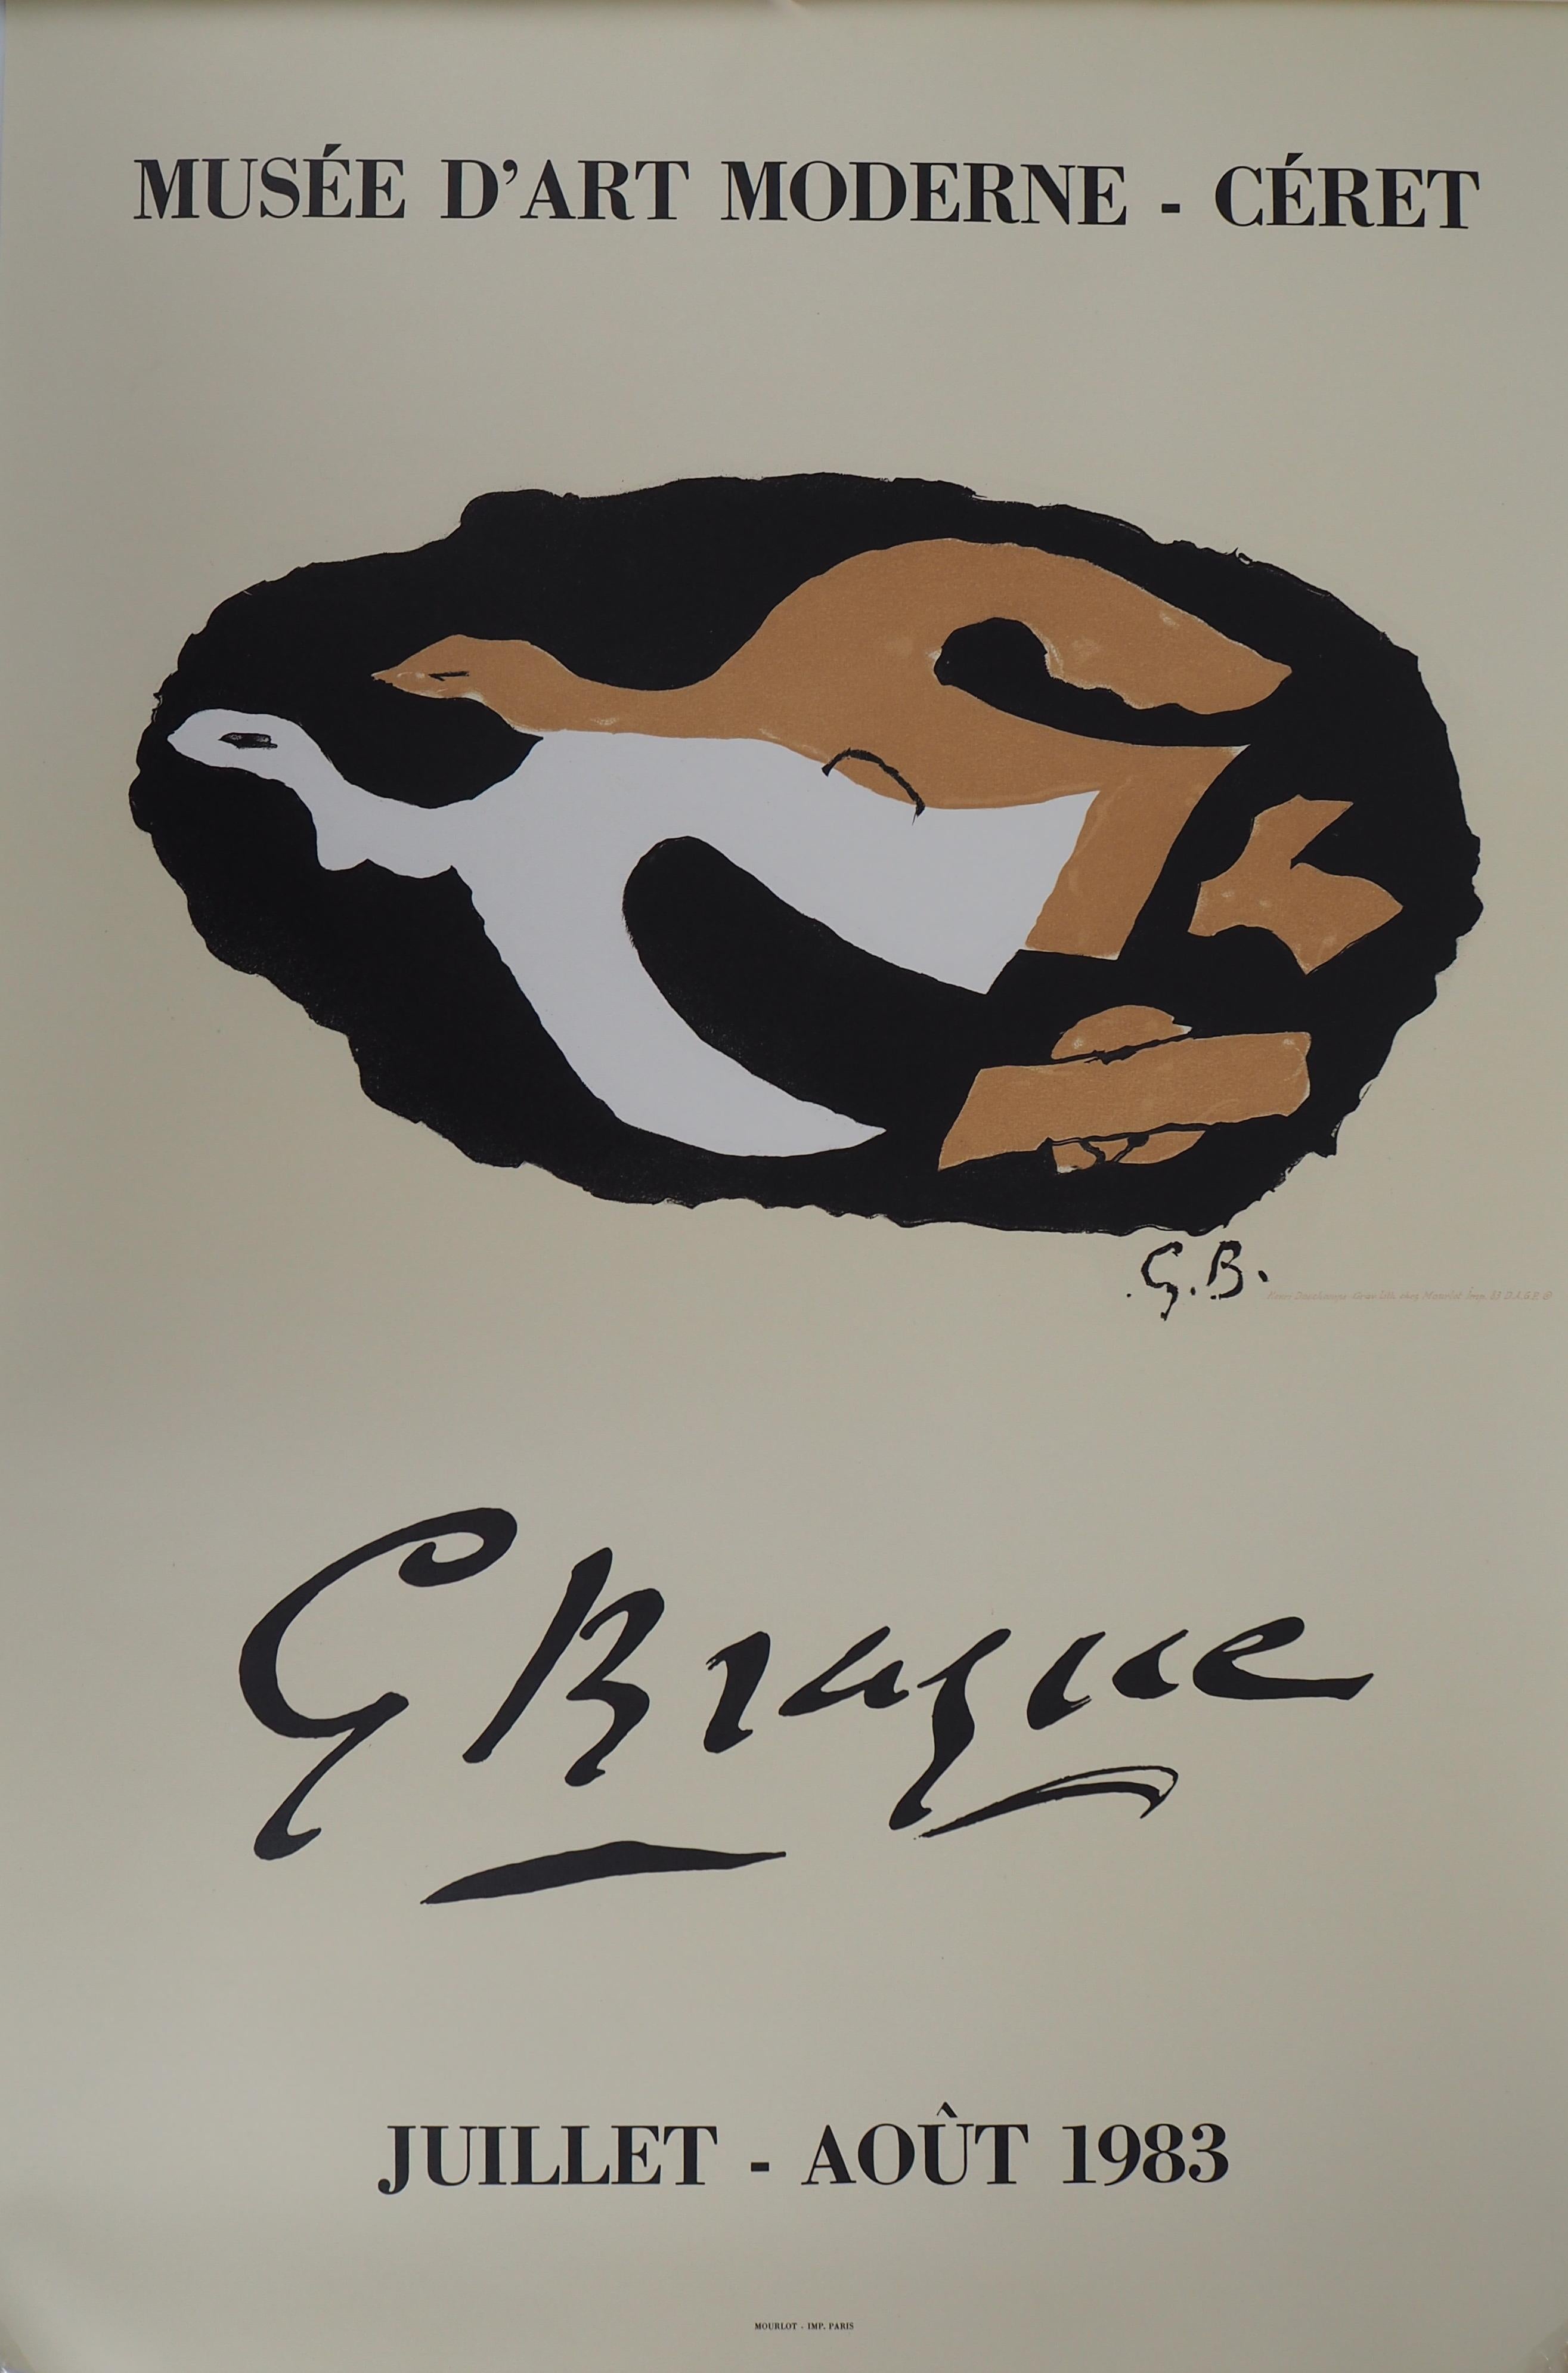 Georges Braque Figurative Print - Two Birds Flying - Vintage lithograph exhibition poster # Mourlot